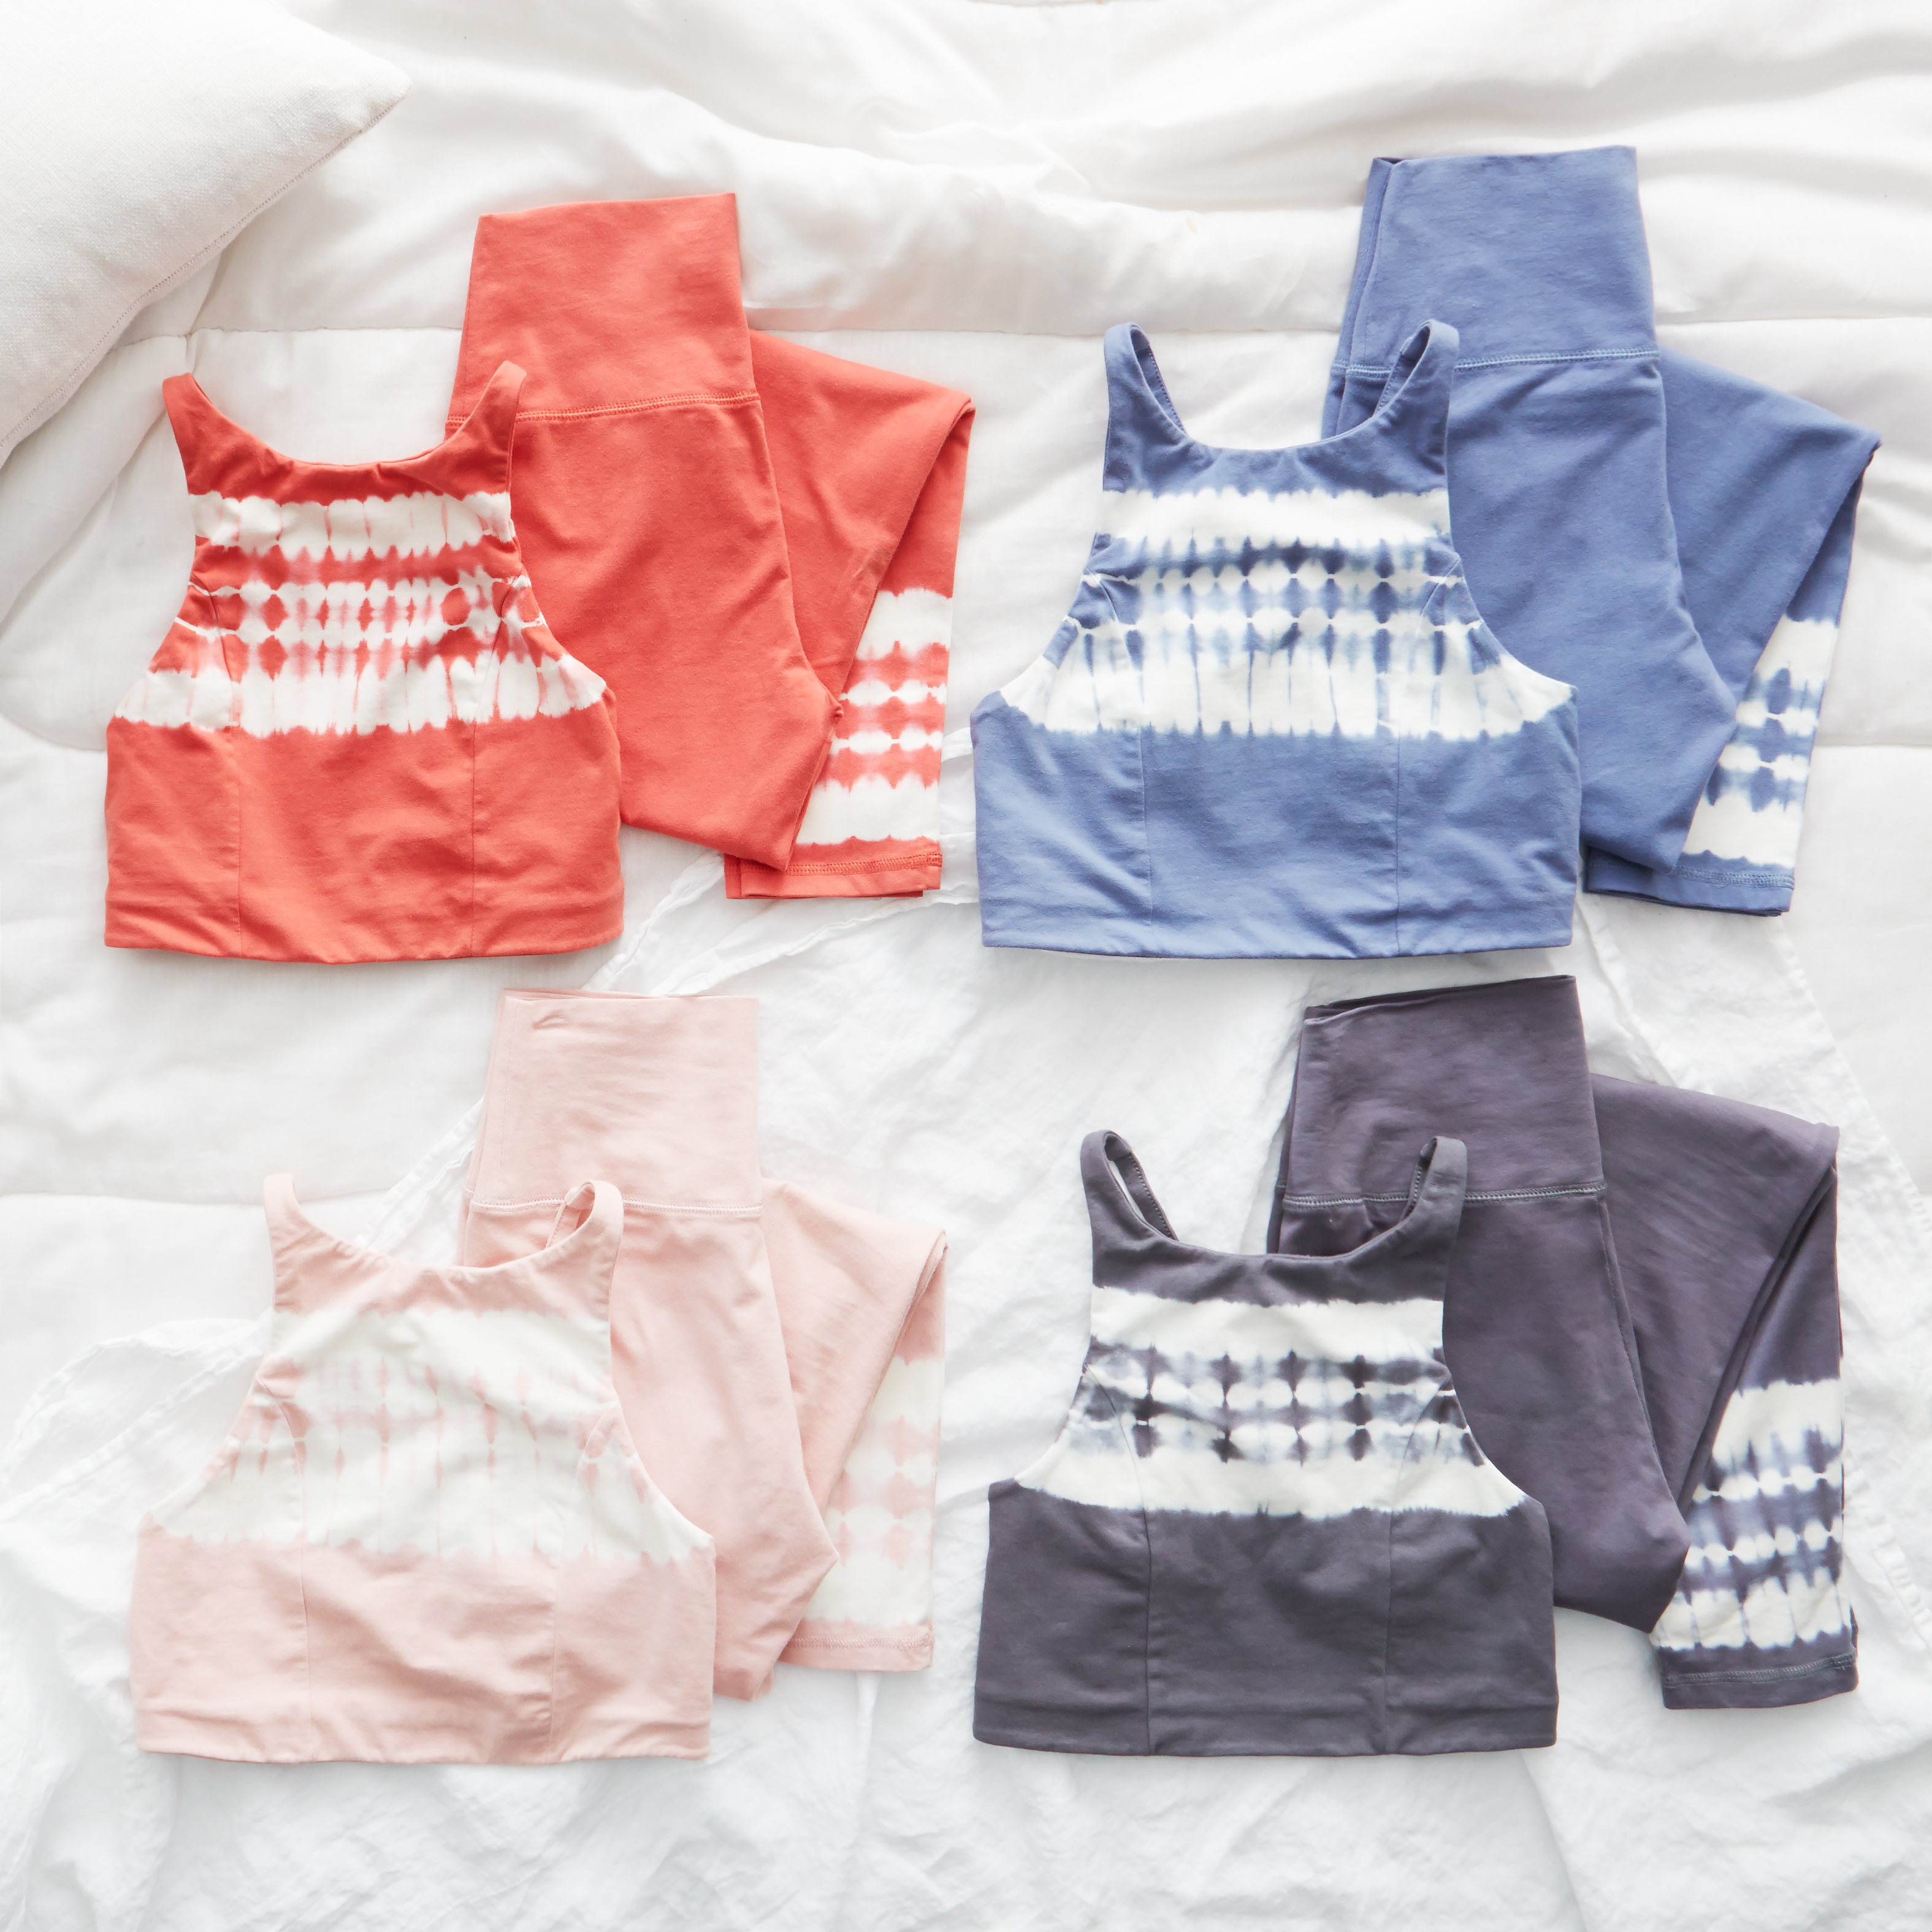 Stylist's Picks: Chill. Play. Move. sets - #AerieREAL Life